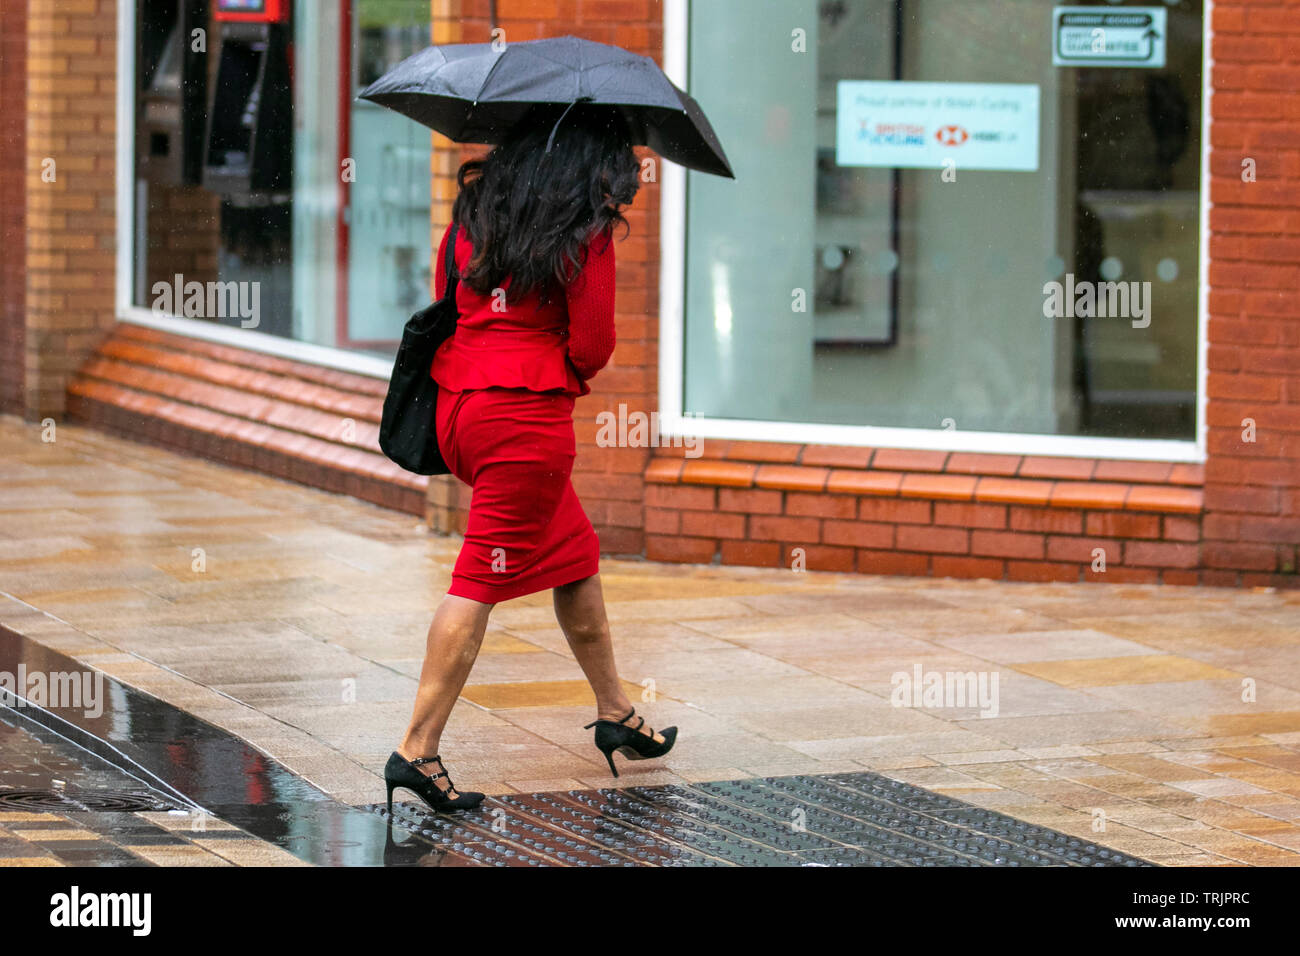 Preston, Lancashire. 7th June, 2019. UK Weather:  Heavy showers on Preston city centre as shoppers take cover as further adverse weather forecast for the weekend. Credit; MediaWorldImages/AlamyLiveNews. Stock Photo